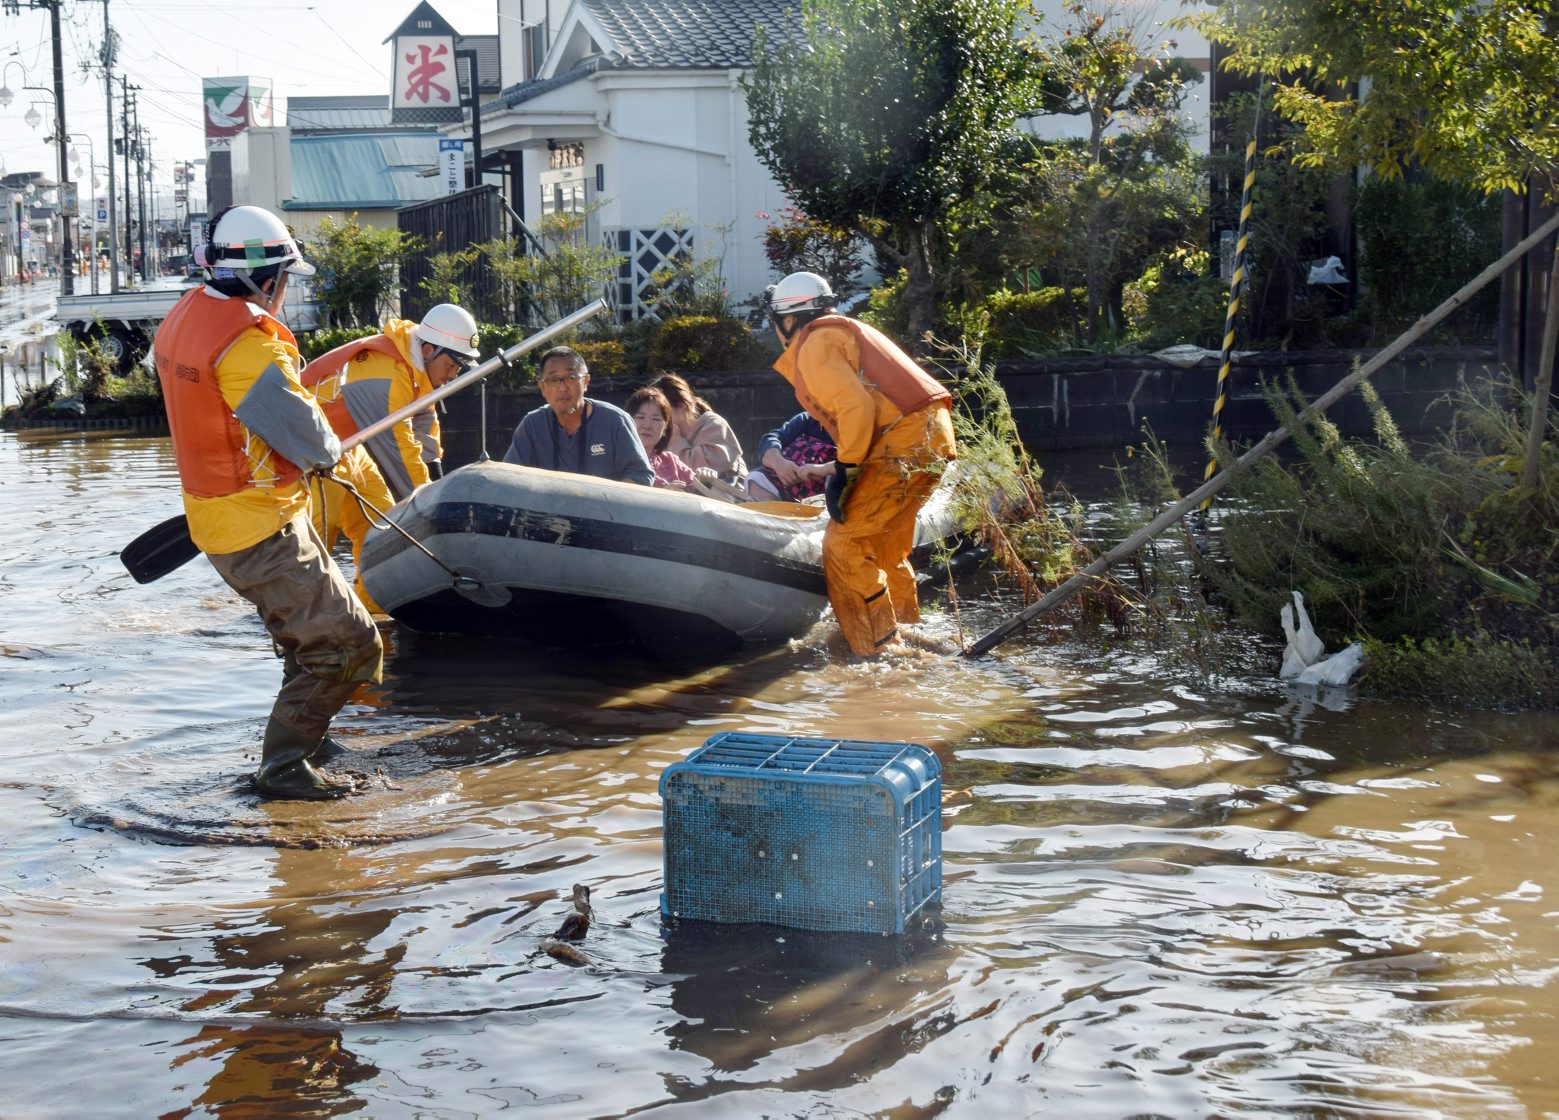 epa07917695 Rescue works are underway in flooded areas in Date, Fukushima prefecture, Japan, 13 October 2019. According to latest media reports, at least 26 people have died and more than 20 are missing after powerful typhoon Hagibis hit Japan provoking landslides and rivers overflowing  across the country.  EPA/JIJI PRESS JAPAN OUT EDITORIAL USE ONLY/  NO ARCHIVES  NO ARCHIVES  NO ARCHIVES JAPAN TYPHOON AFTERMATH